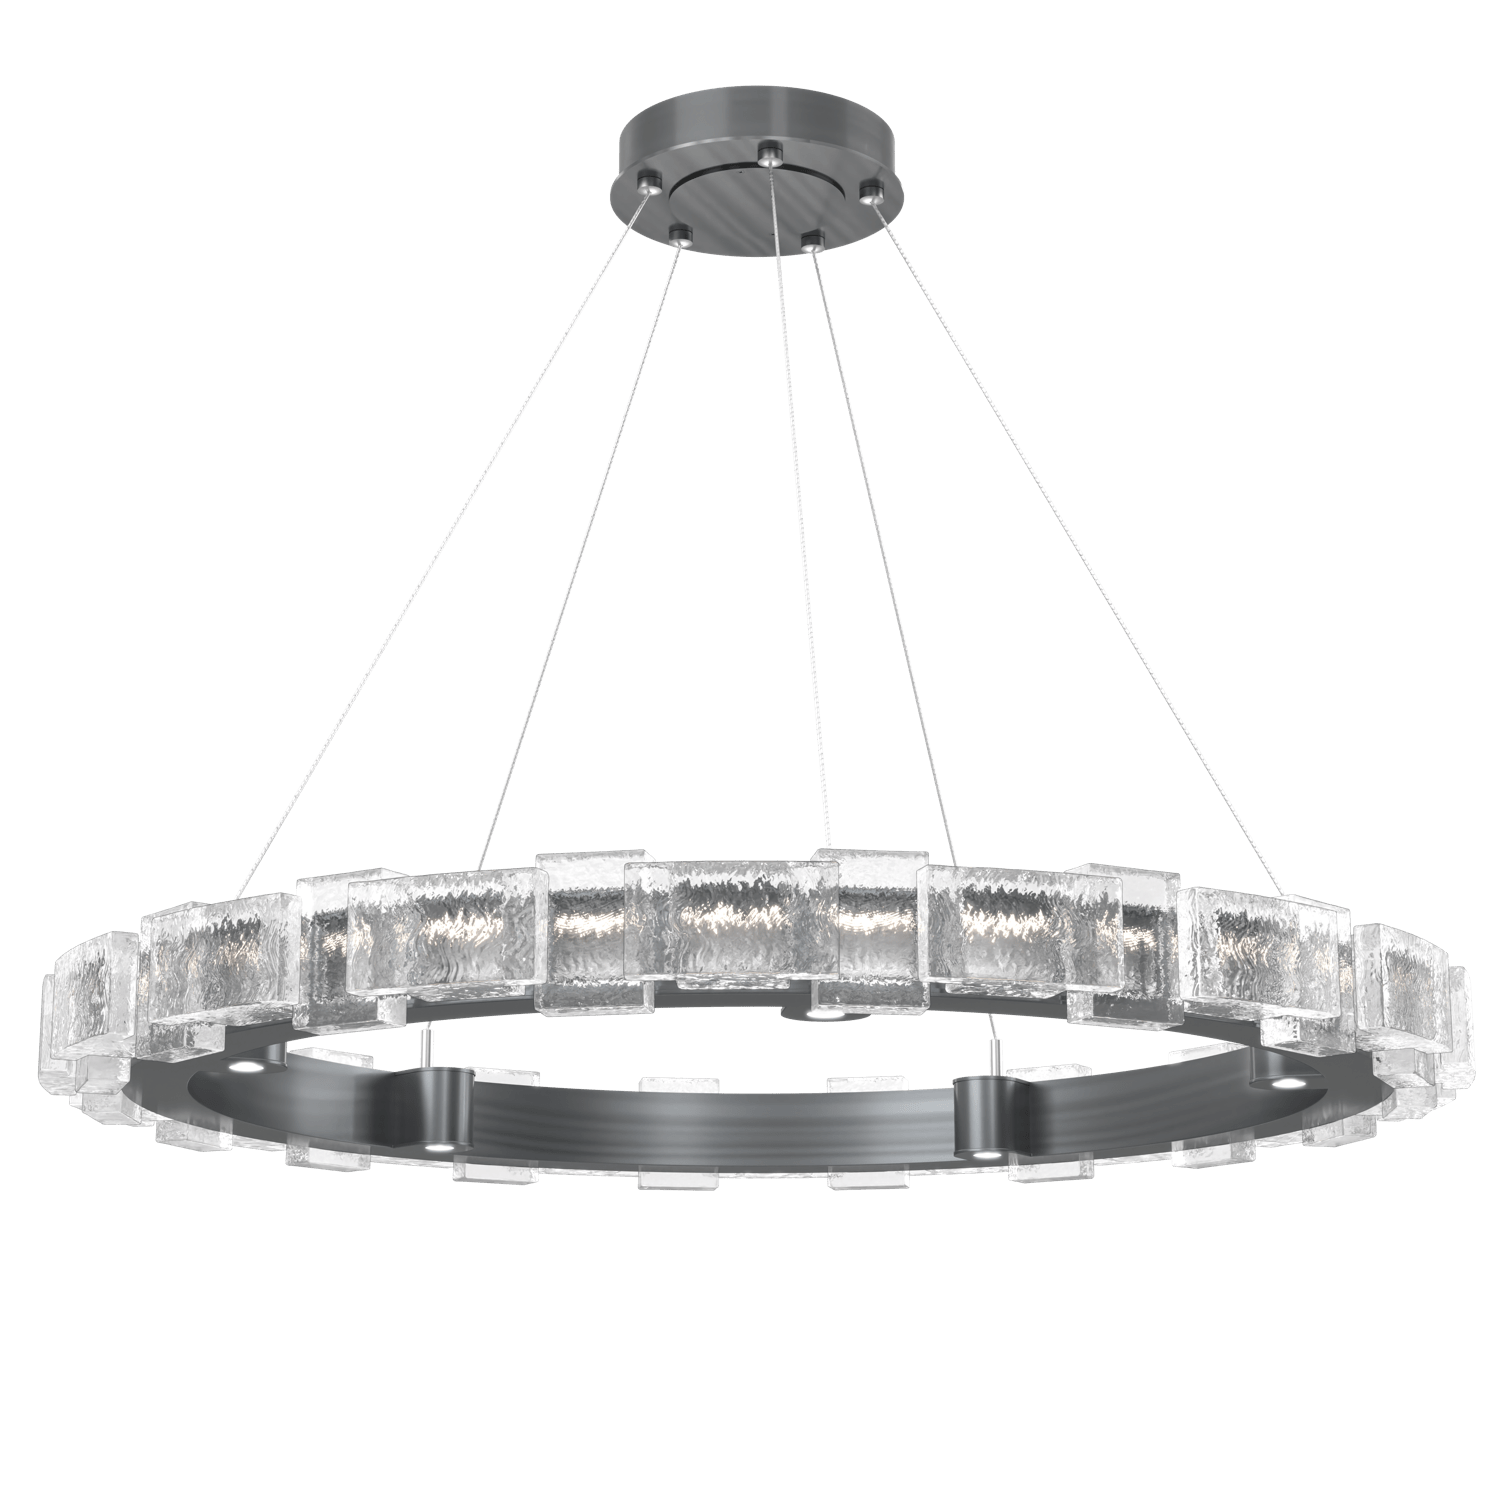 CHB0087-38-GM-TE-Hammerton-Studio-Tessera-38-inch-ring-chandelier-with-gunmetal-finish-and-clear-tetro-cast-glass-shade-and-LED-lamping